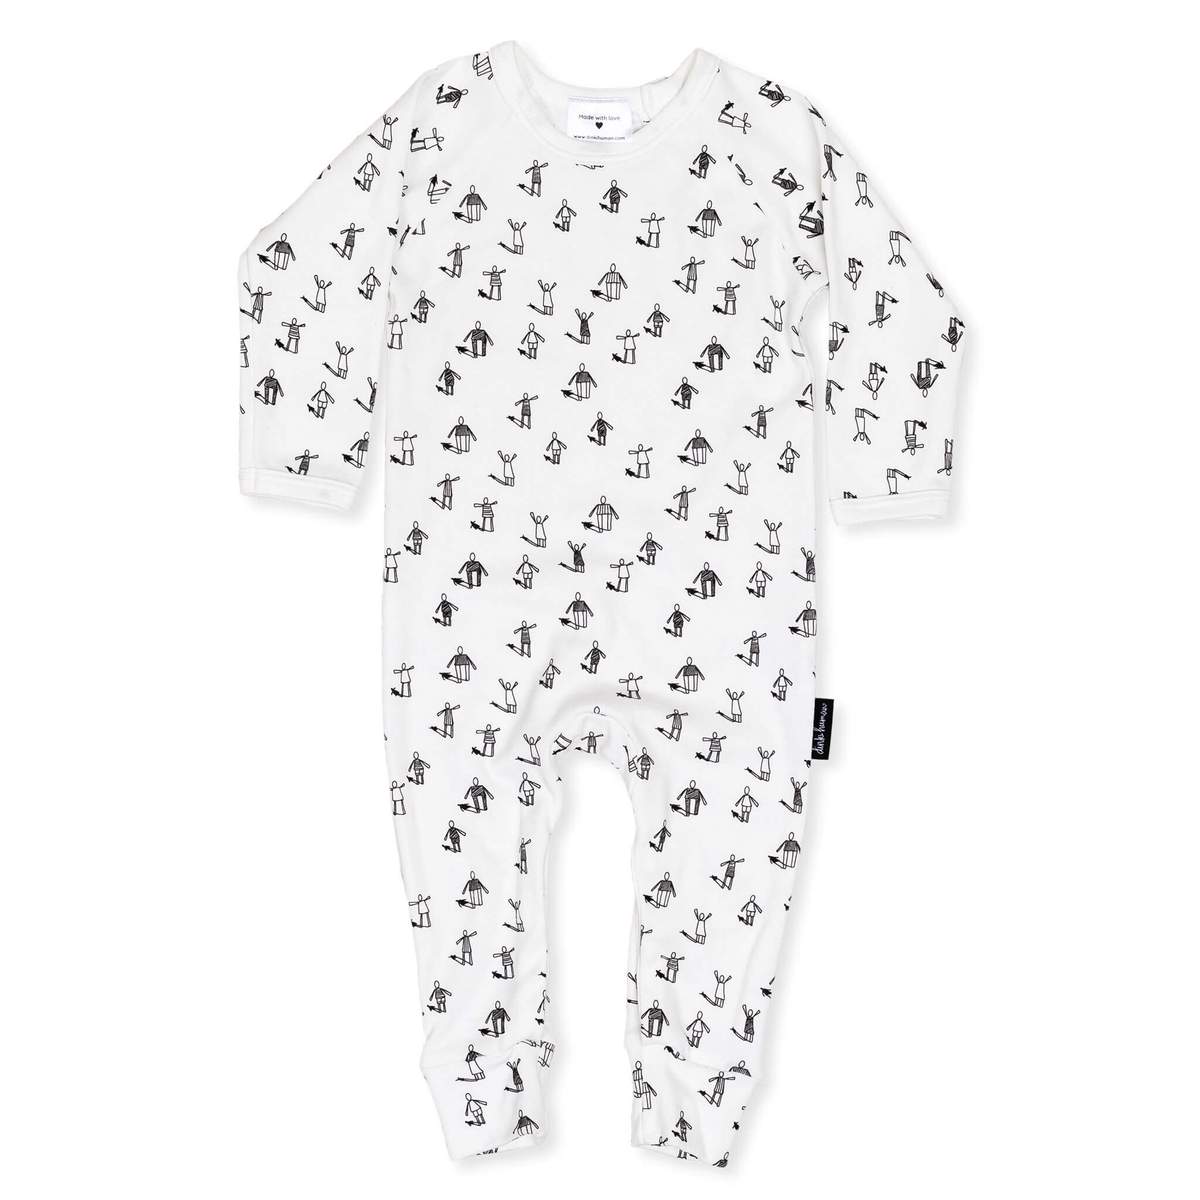 'Community' Onesie – For Kids and Planet